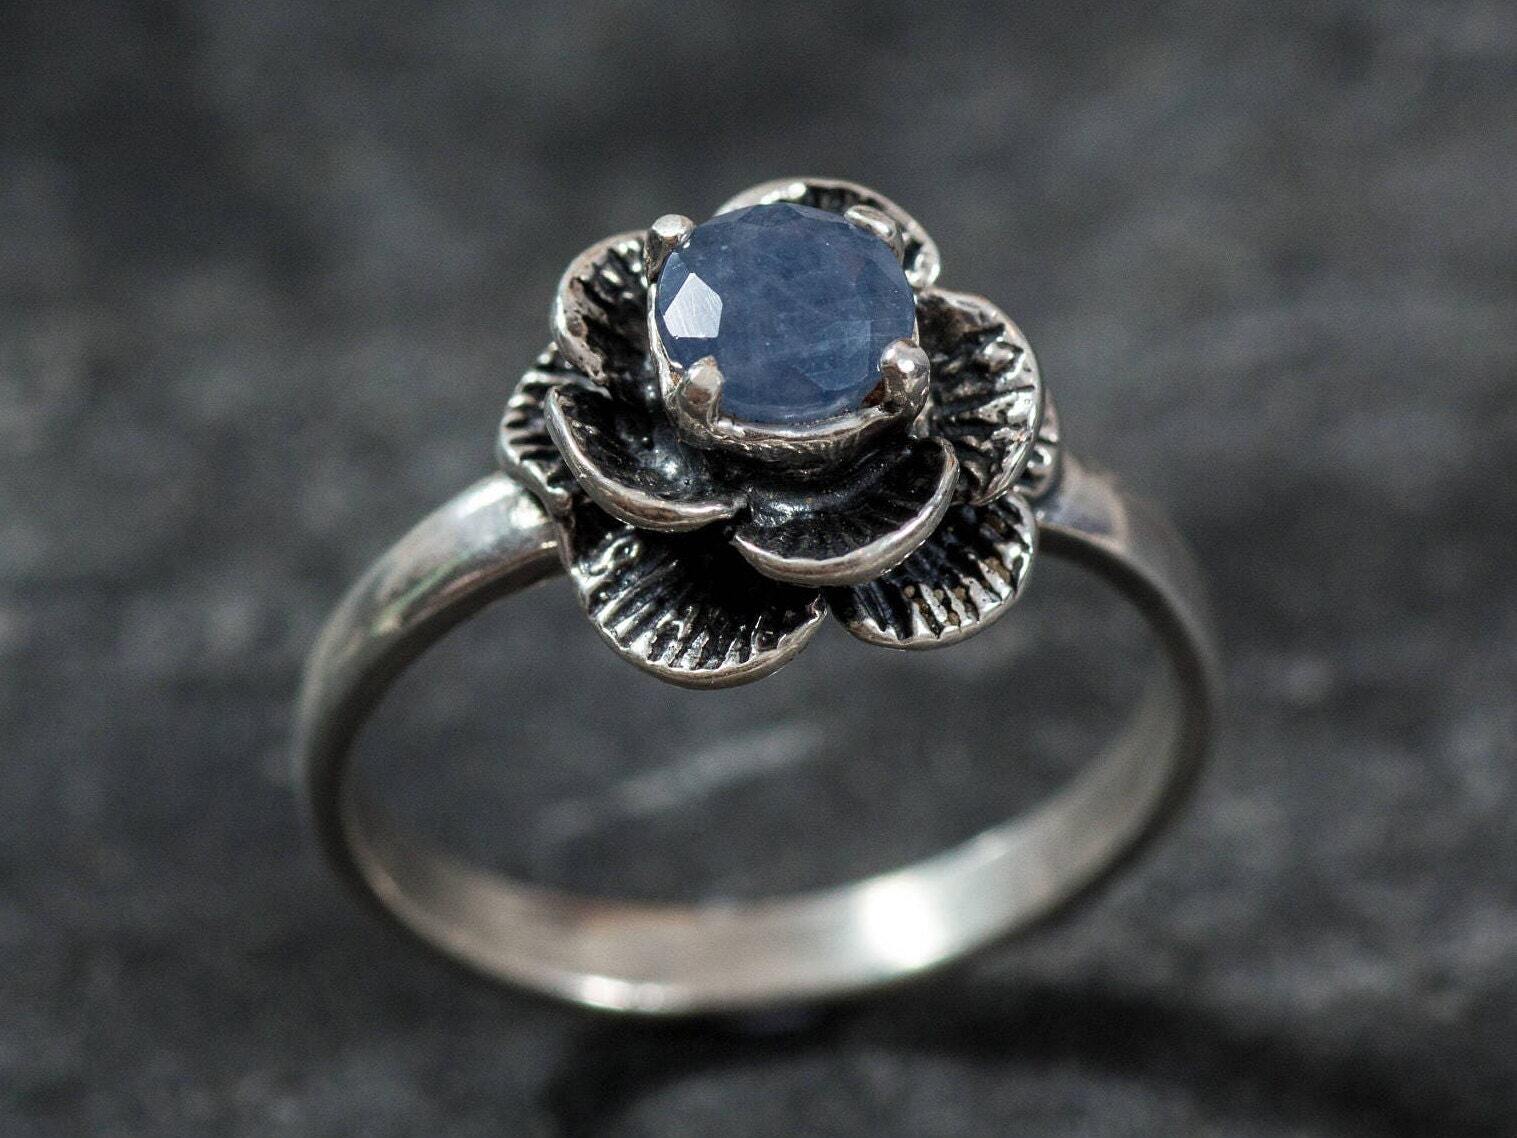 Blue Rose Ring - Natural Sapphire Ring - Solitaire Flower Ring